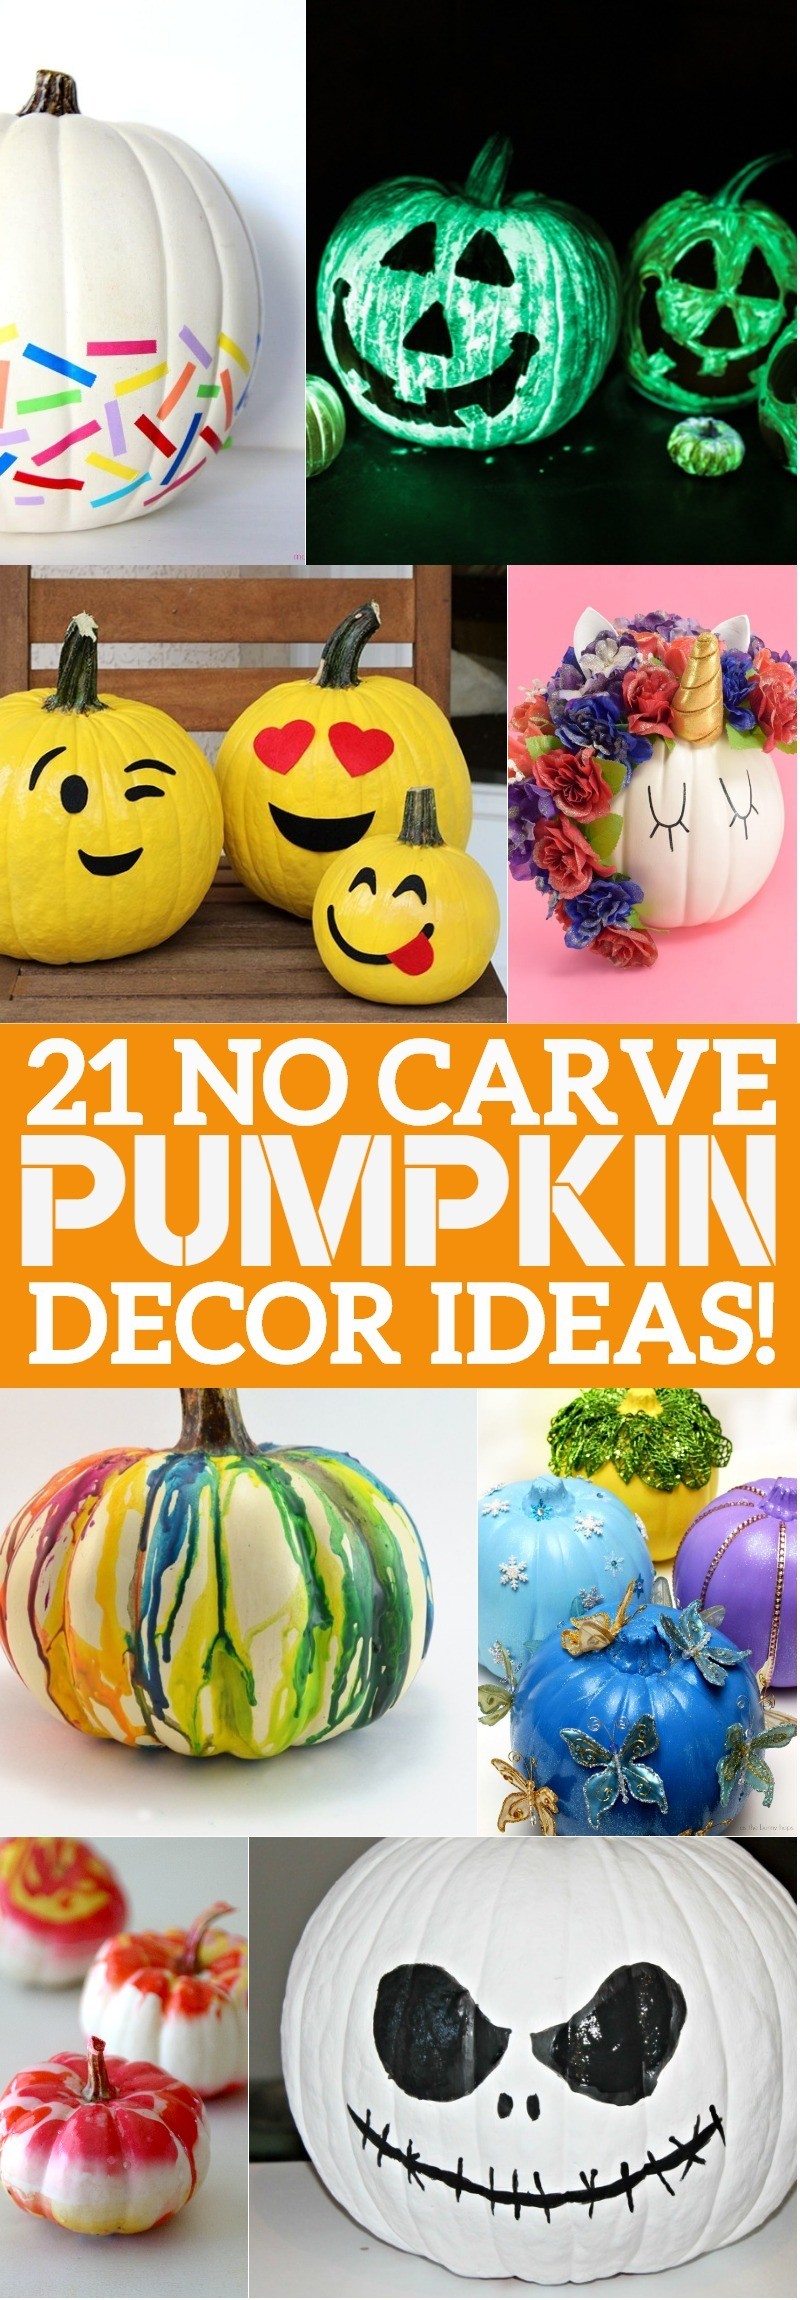 21 No Carve Pumpkin Decorating Ideas That Youll LOVE This Halloween